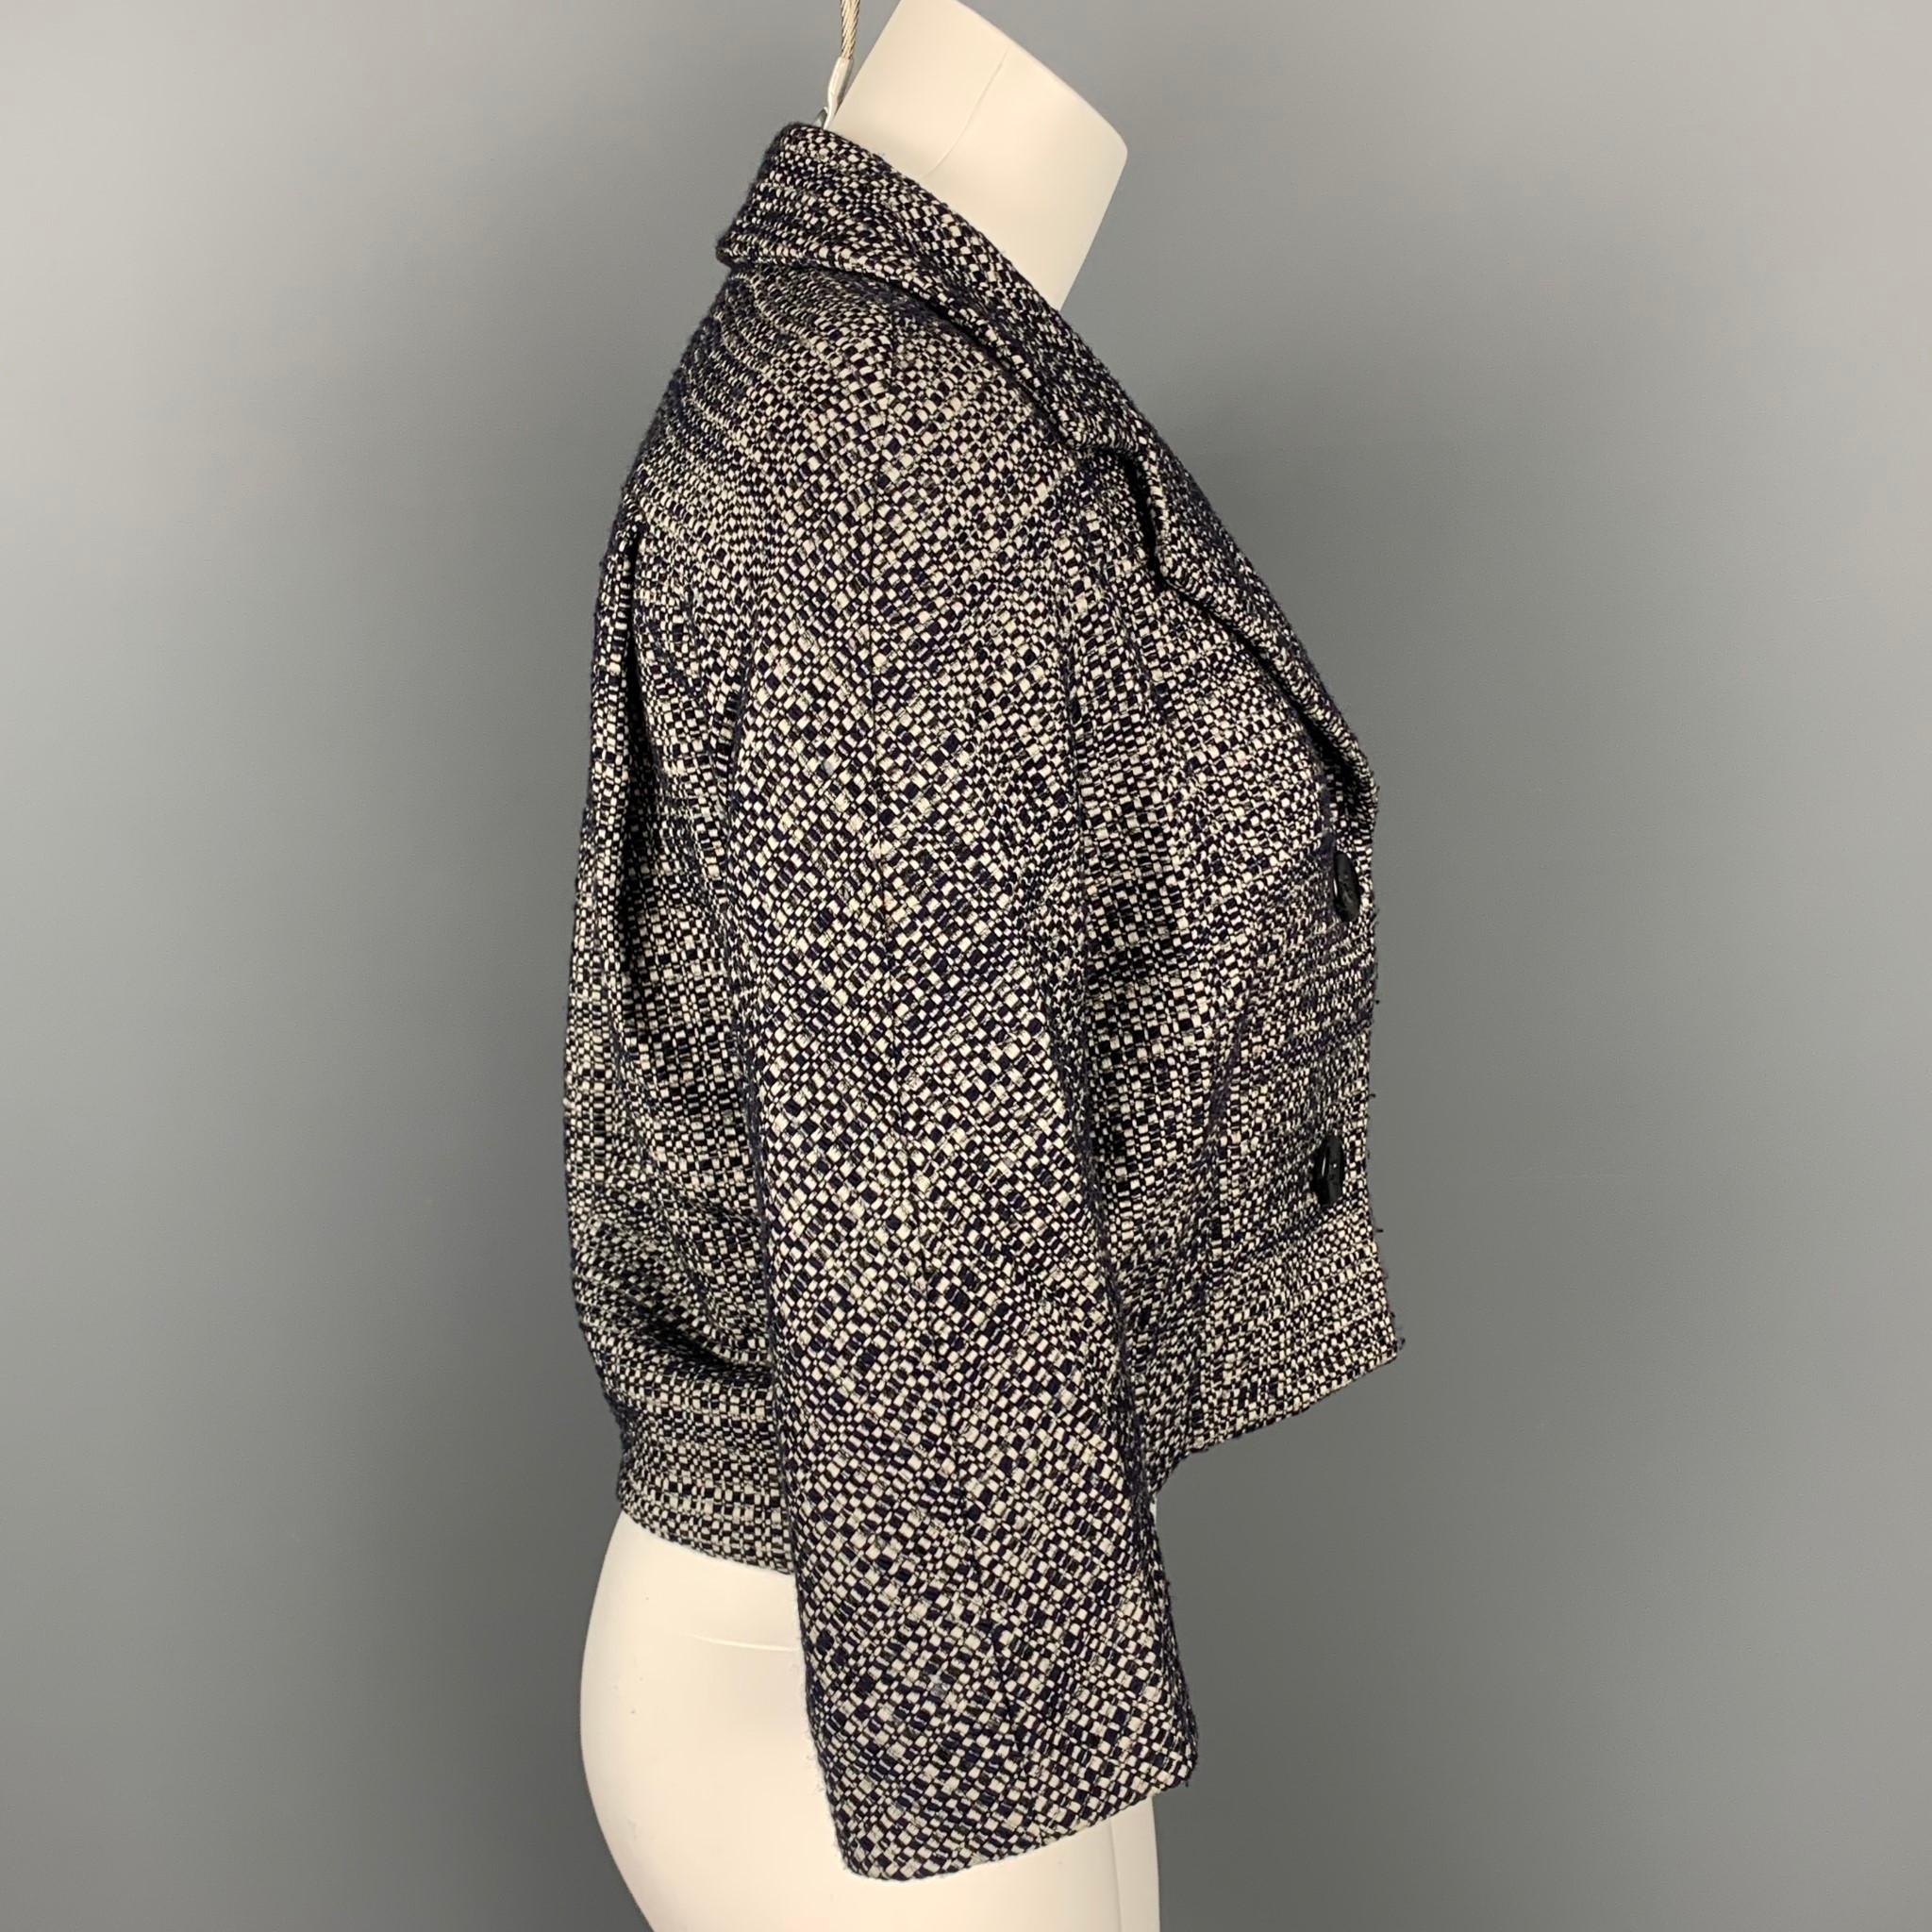 MAX MARA jacket comes in a navy & white boucle cotton with a full liner featuring a cropped style, 3/4 sleeves, notch lapel, and a buttoned closure. Made in Italy.

Good Pre-Owned Condition.
Marked: 6

Measurements:

Shoulder: 17 in.
Bust: 38